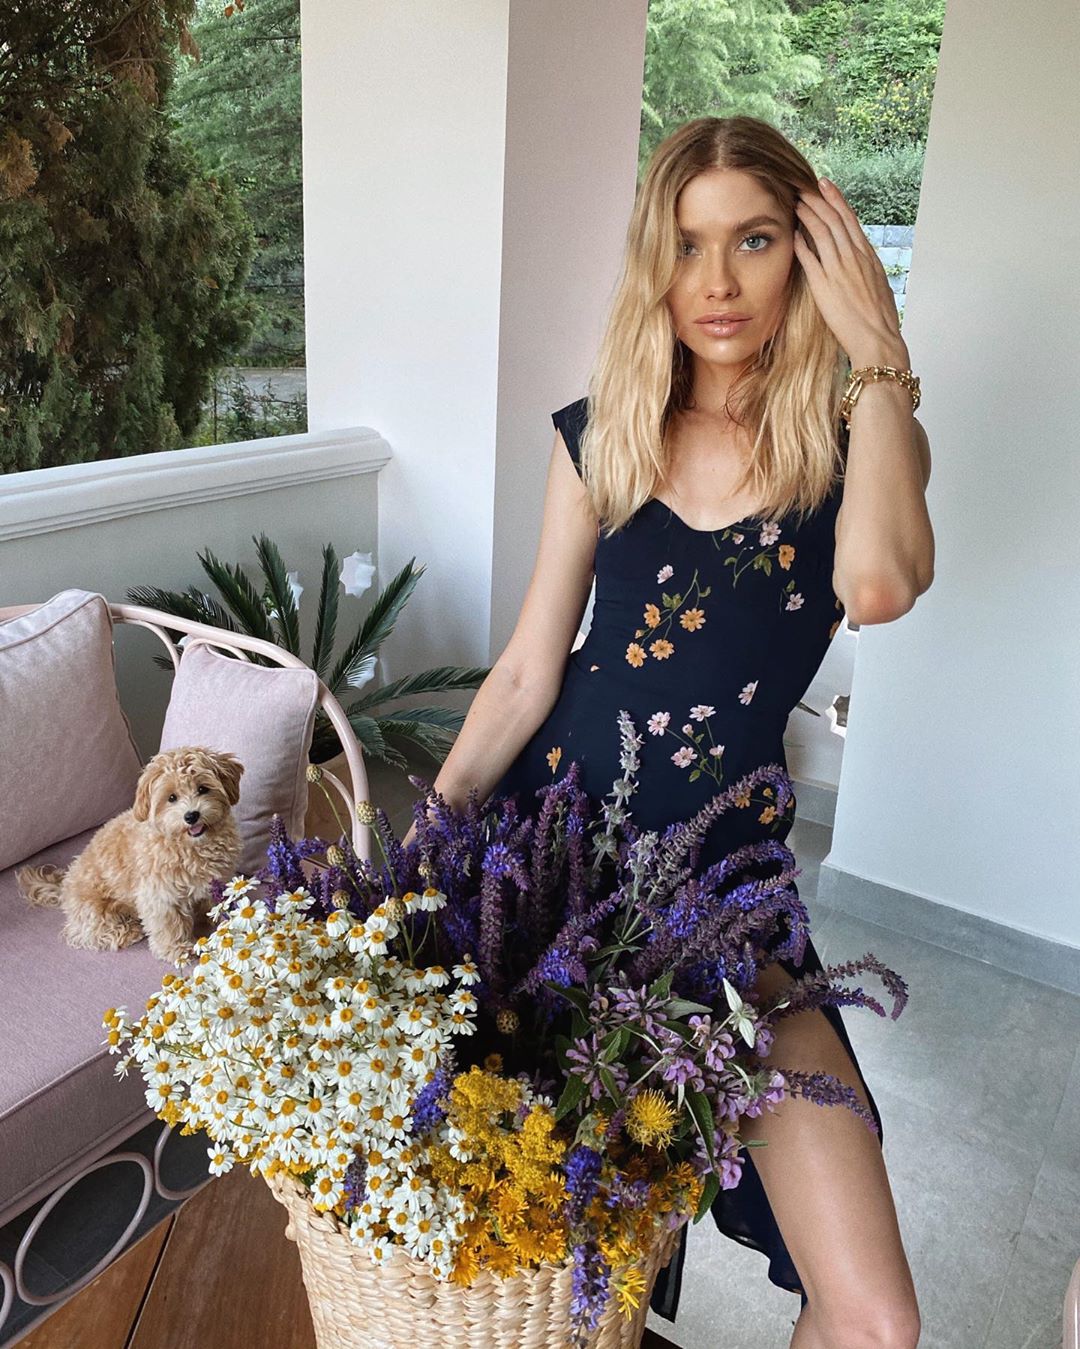 33 of Today's Captivating Flowers Inspo for Girls Who Love Having Flowers around ...